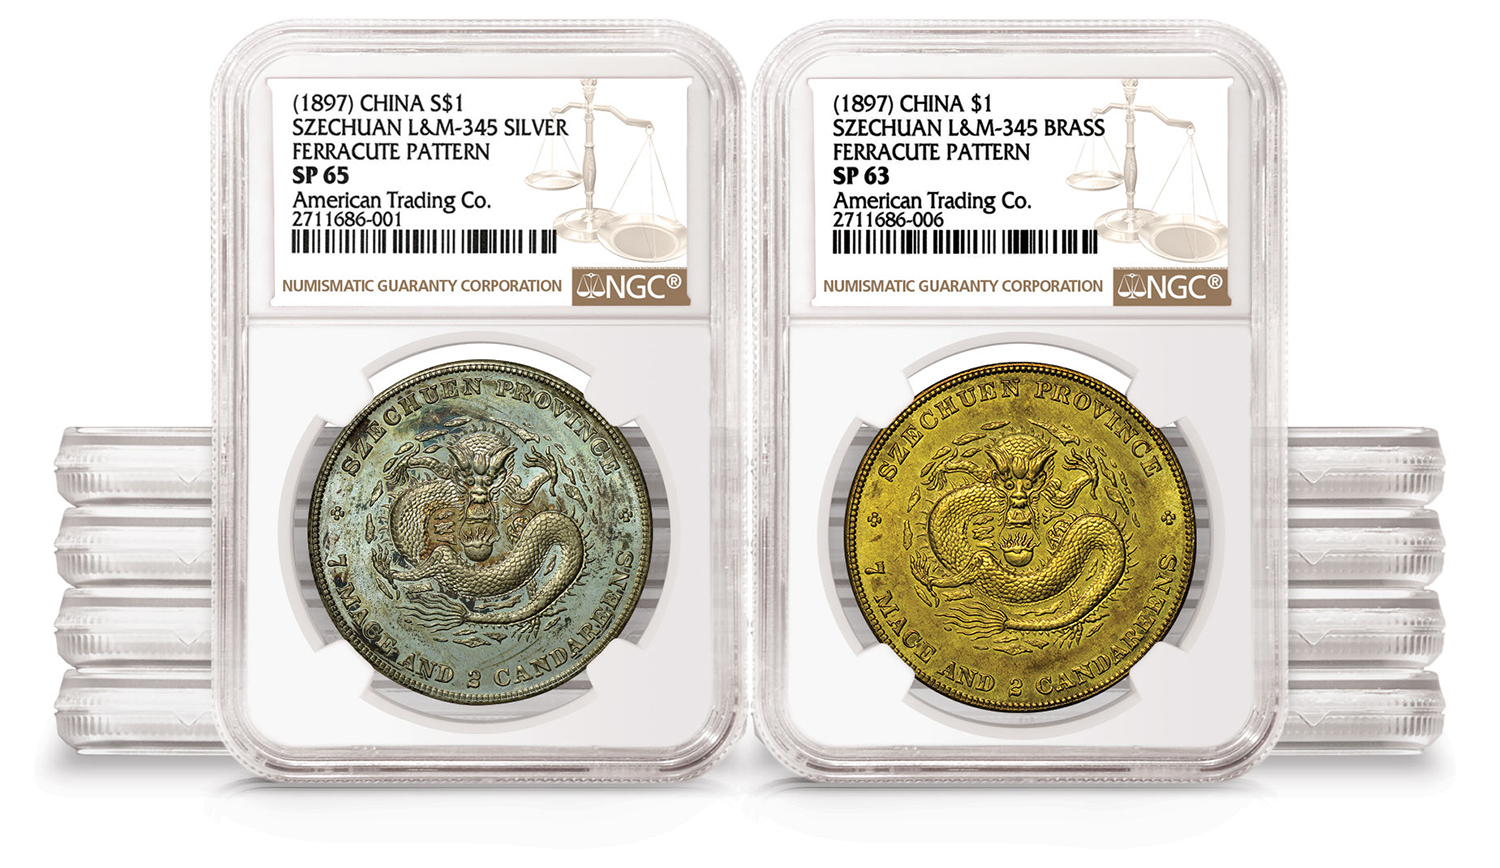 enlarged image for NGC-certified 1897 Szechuan Ferracute Pattern Set Realizes $1,020,000 at Auction